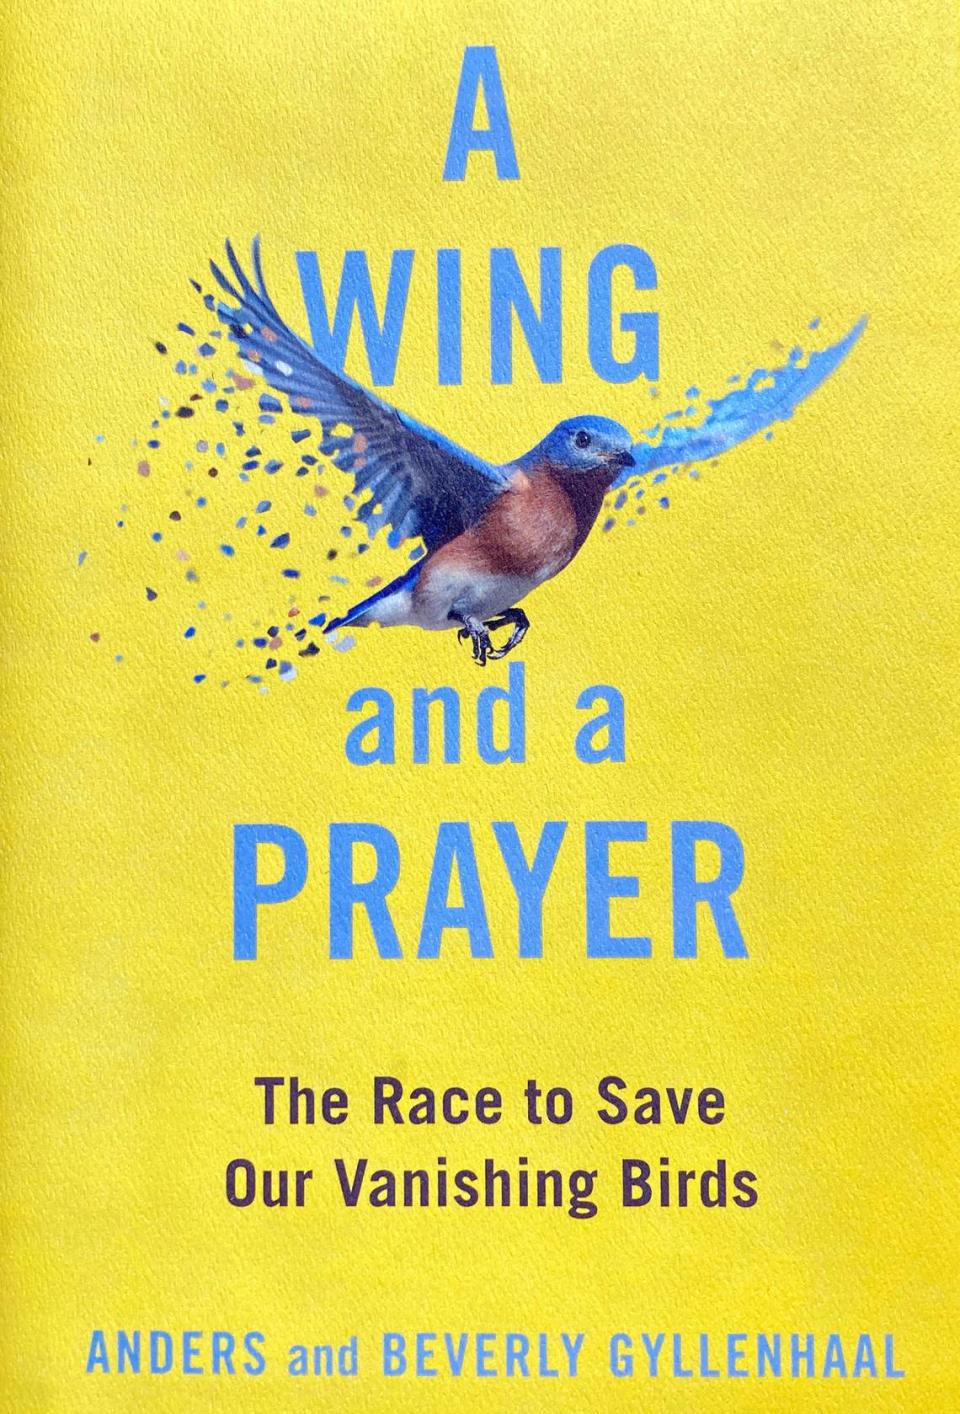 “A Wing and a Prayer, The Race to Save Our Vanishing Birds” by Anders and Beverly Gyllenhaal